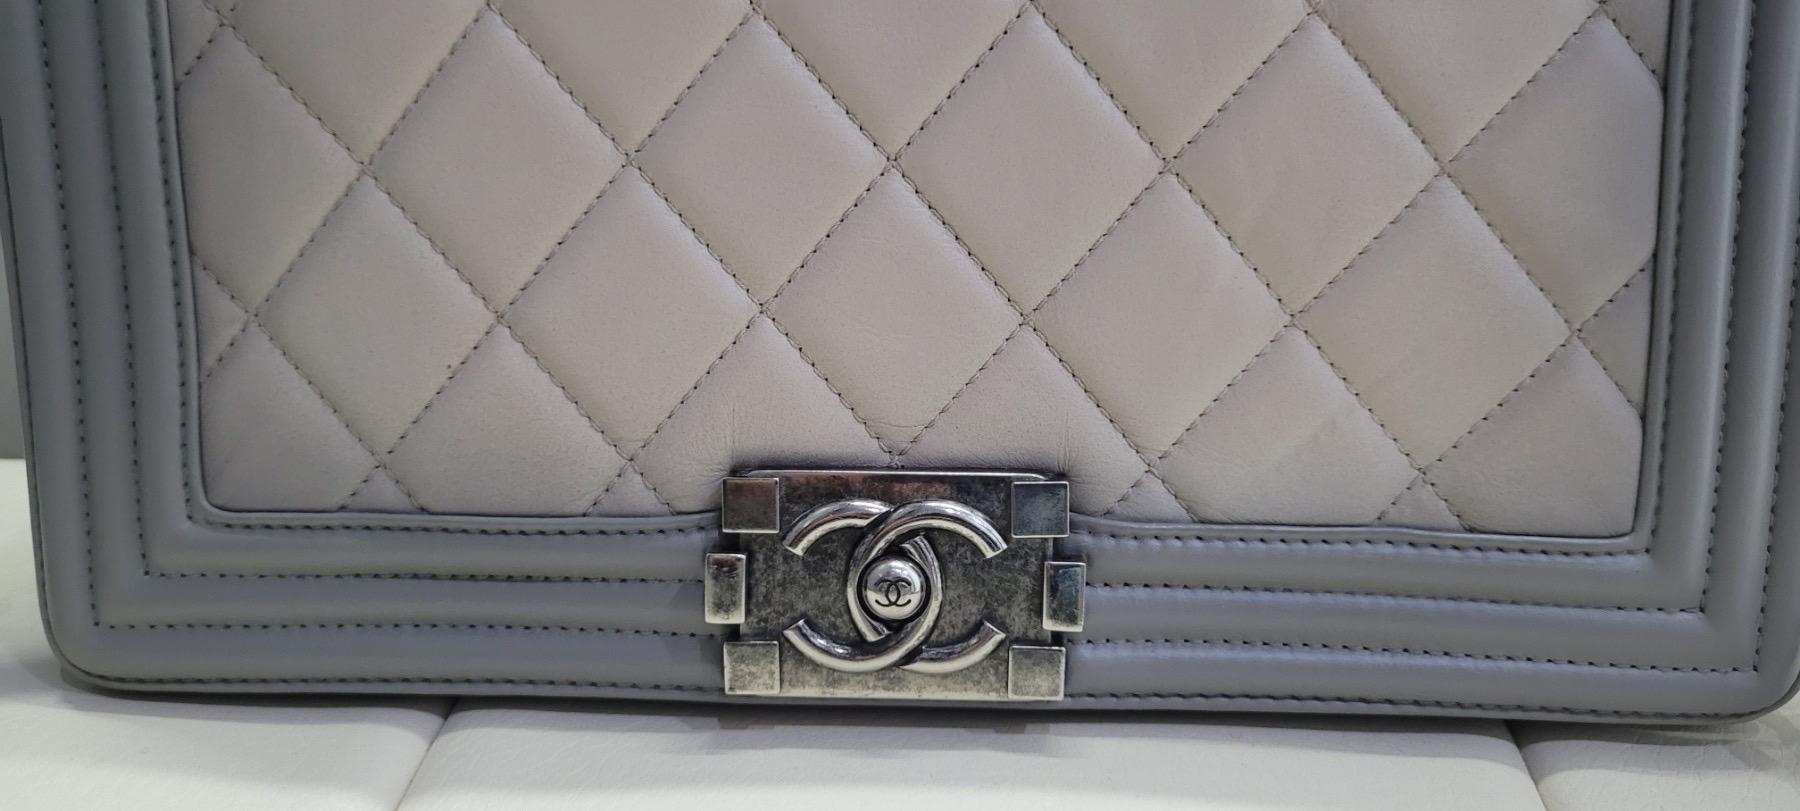 This is an authentic CHANEL Calfskin Ombre Quilted Large Boy Flap in Grey and Beige.
This chic shoulder bag is crafted of luxuriously soft lambskin diamond quilted leather with a linear quilted periphery in beige and grey. 
The bag features a dark